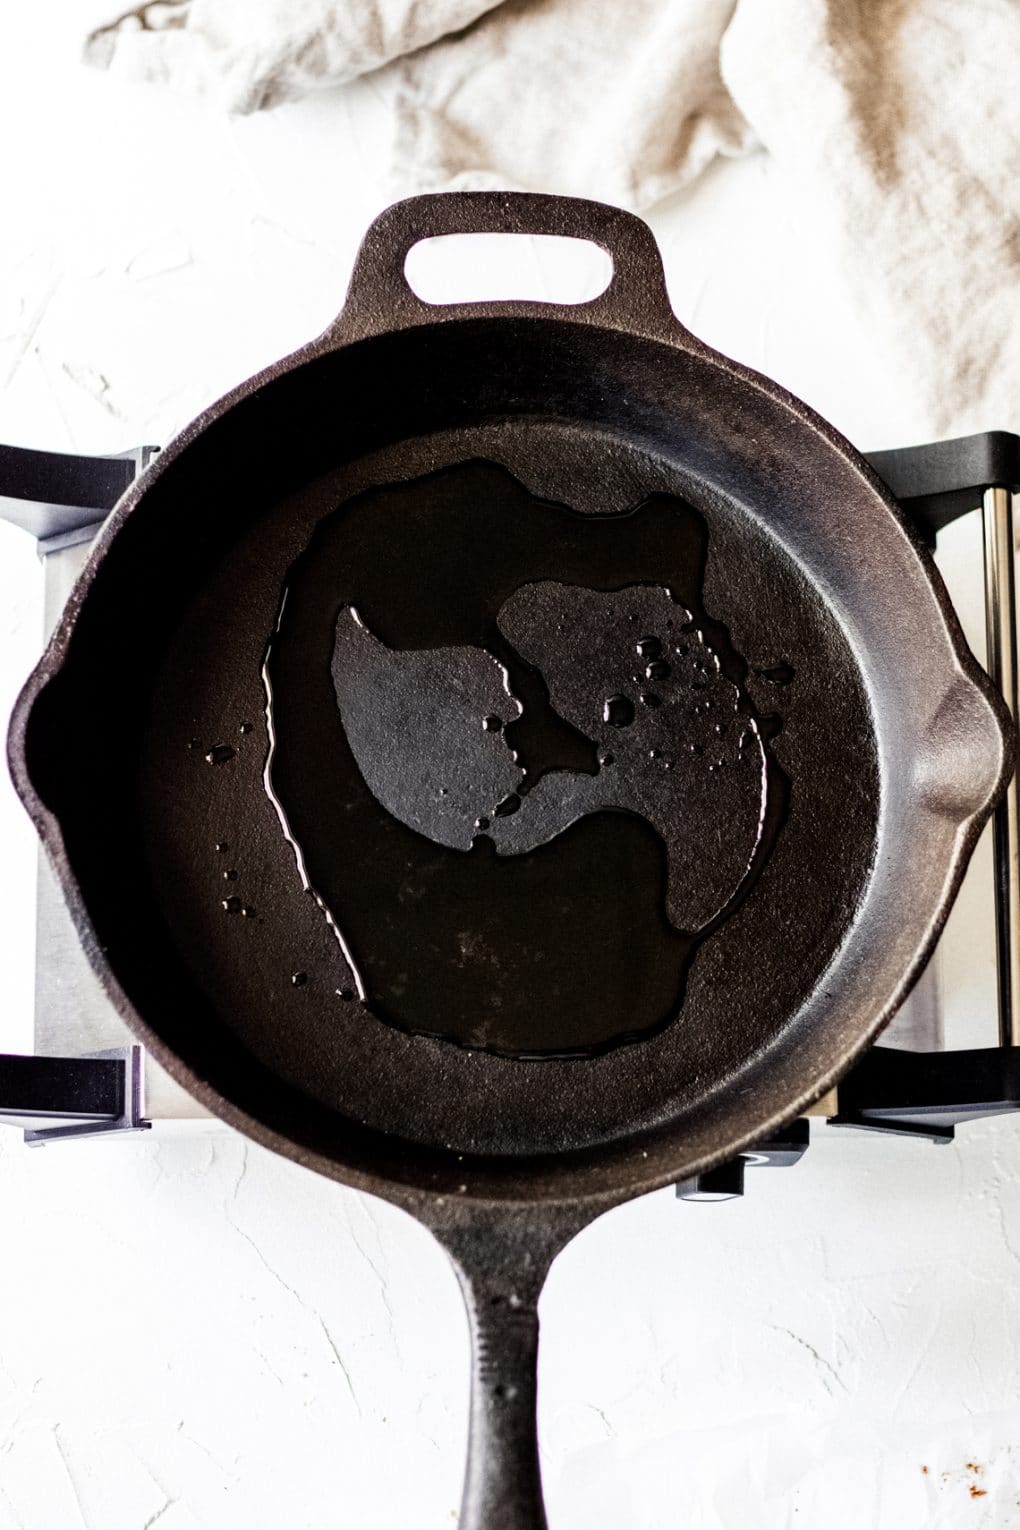 cooking oil in a cast iron skillet